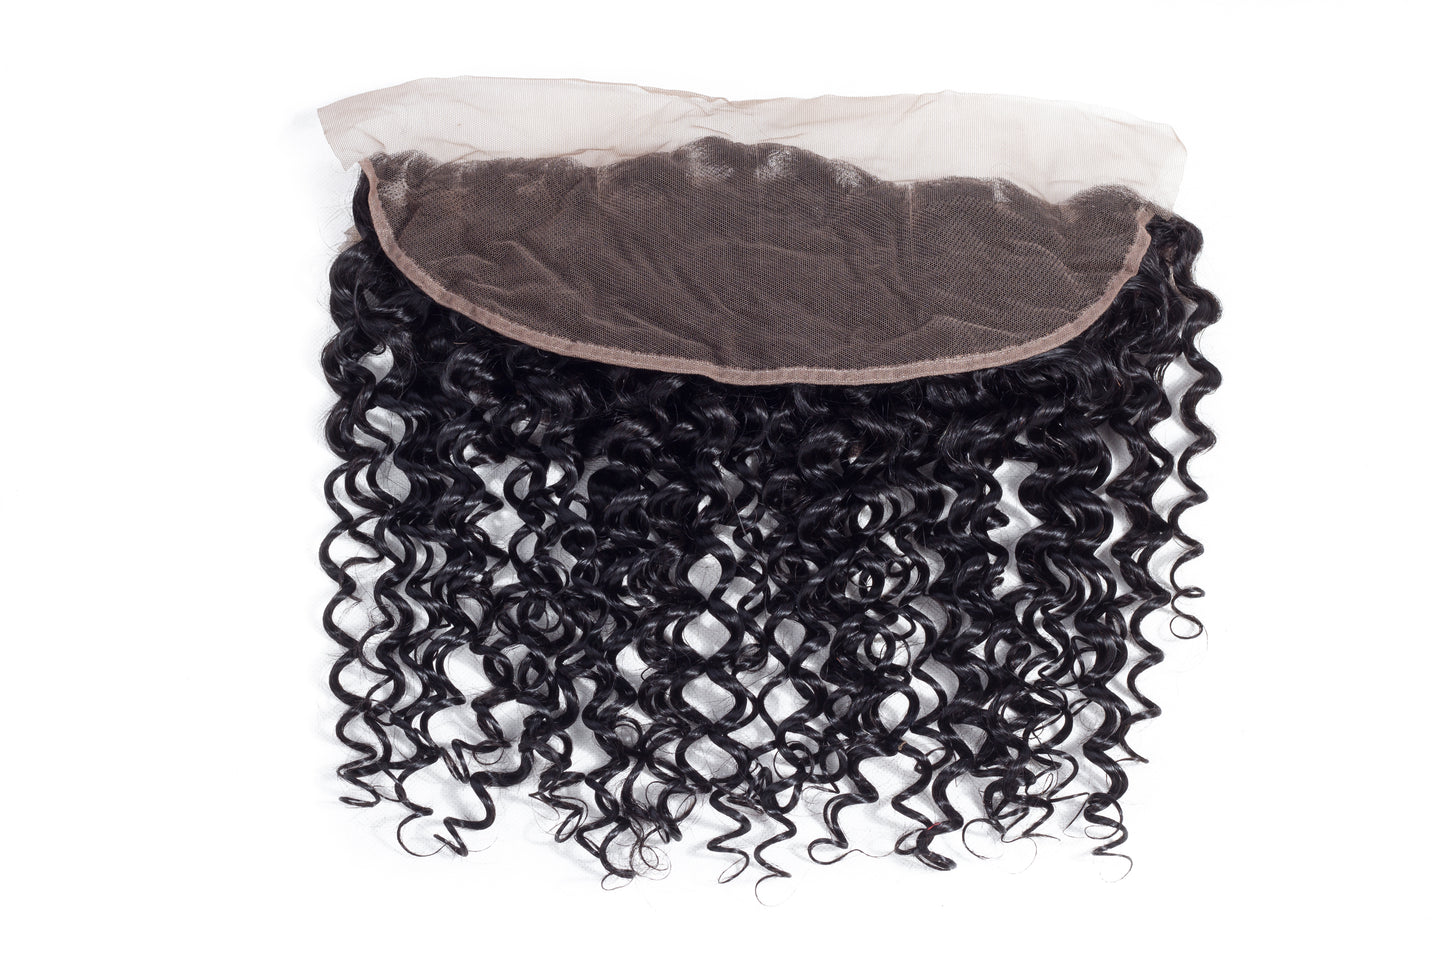 HIHAIR® JERRY CURLY LACE FRONTAL 13*4 - 100% HUMAN VIRGIN HAIR